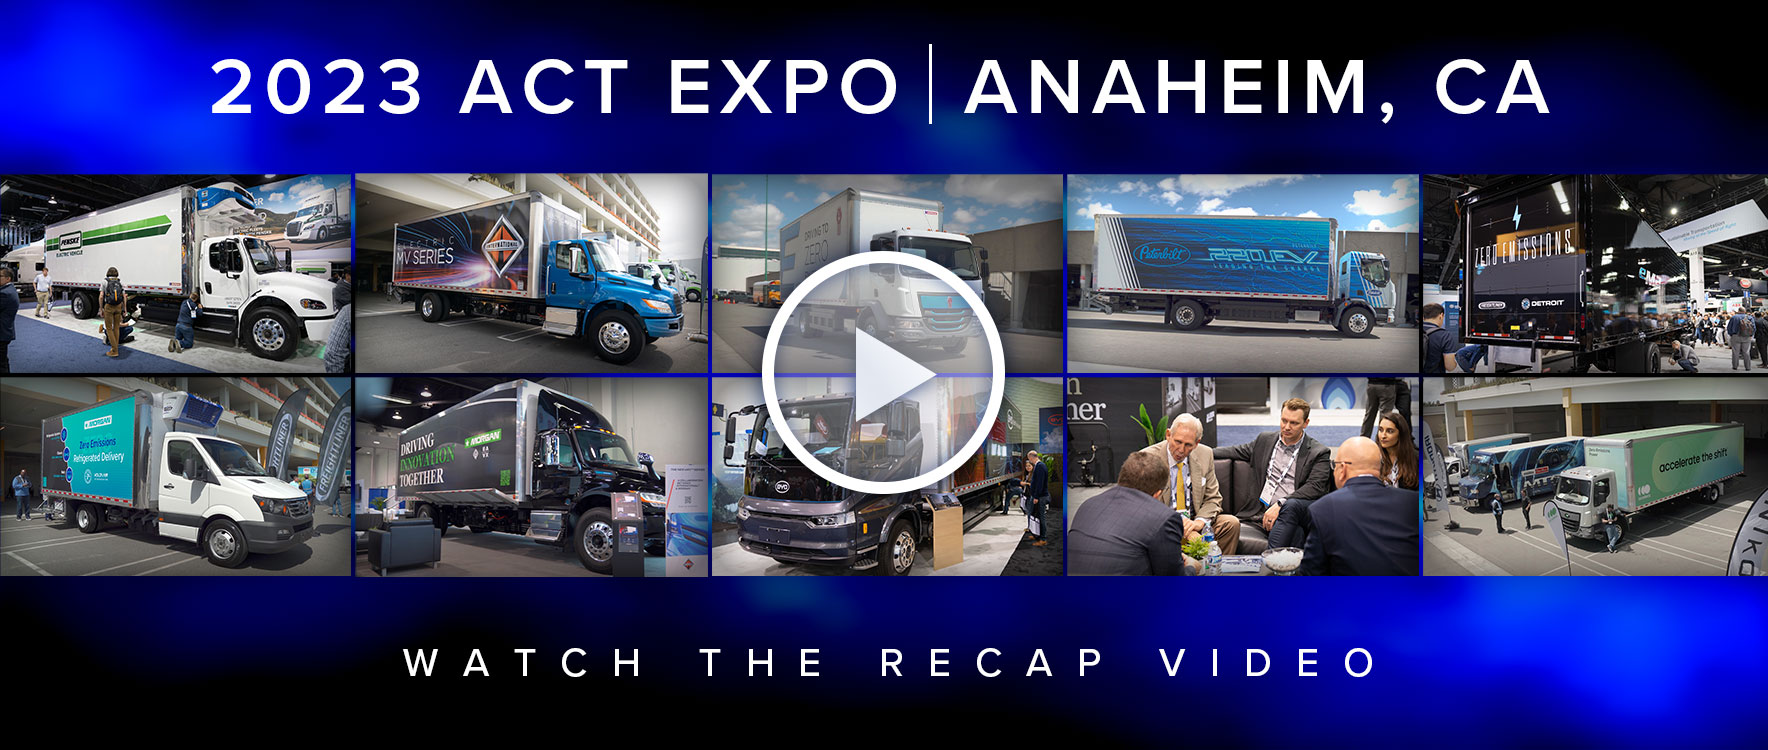 Watch the overview recap video from our time at 2023 ACT Expo